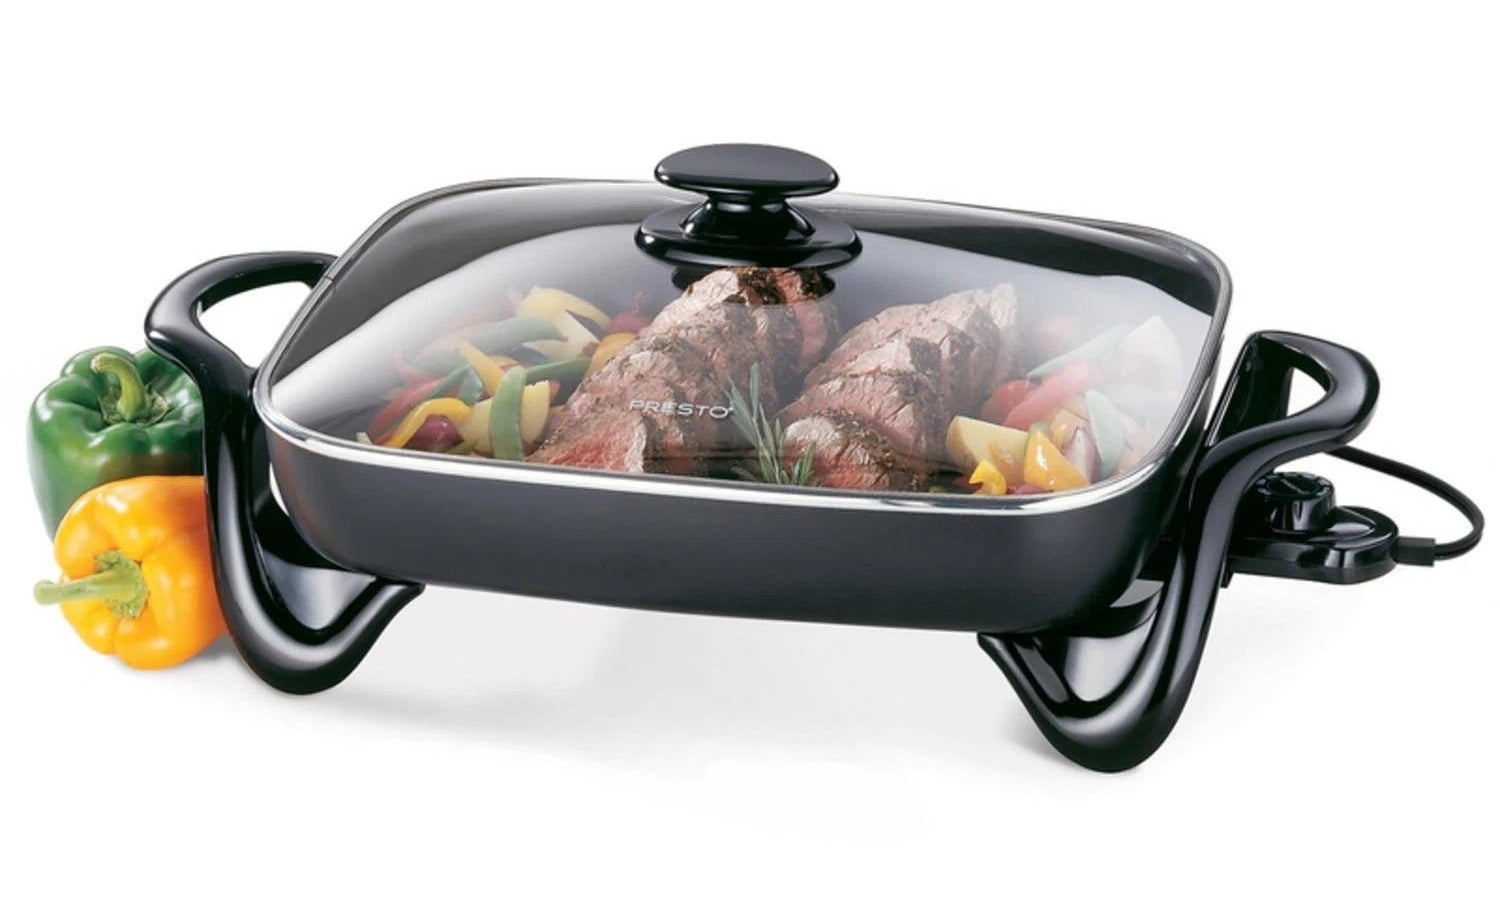 the black electric skillet with steak and peppers inside